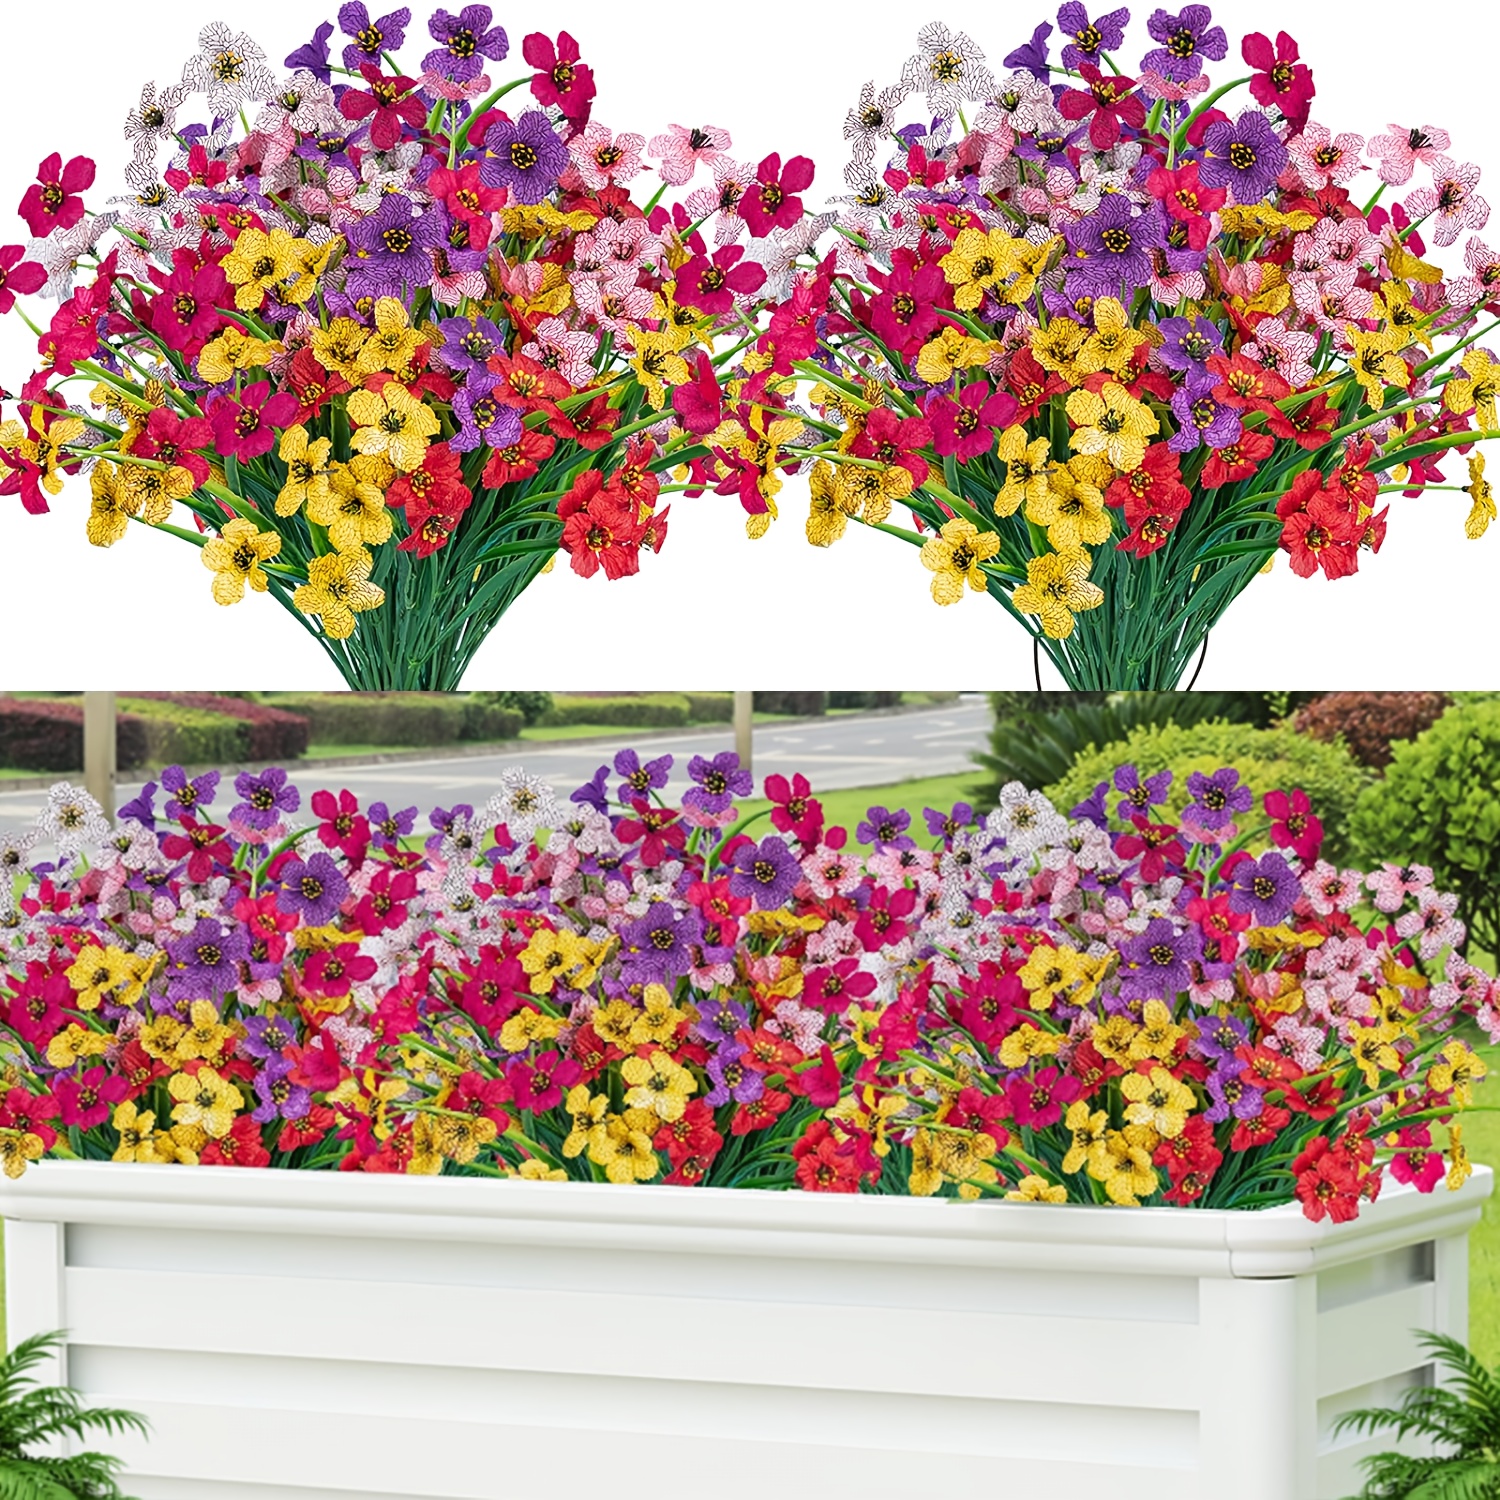 

6-piece Uv Resistant Artificial Flowers - Versatile Faux Floral Decor For Indoor & Outdoor Spaces, Perfect For Gardens, Farmhouses, Weddings & More